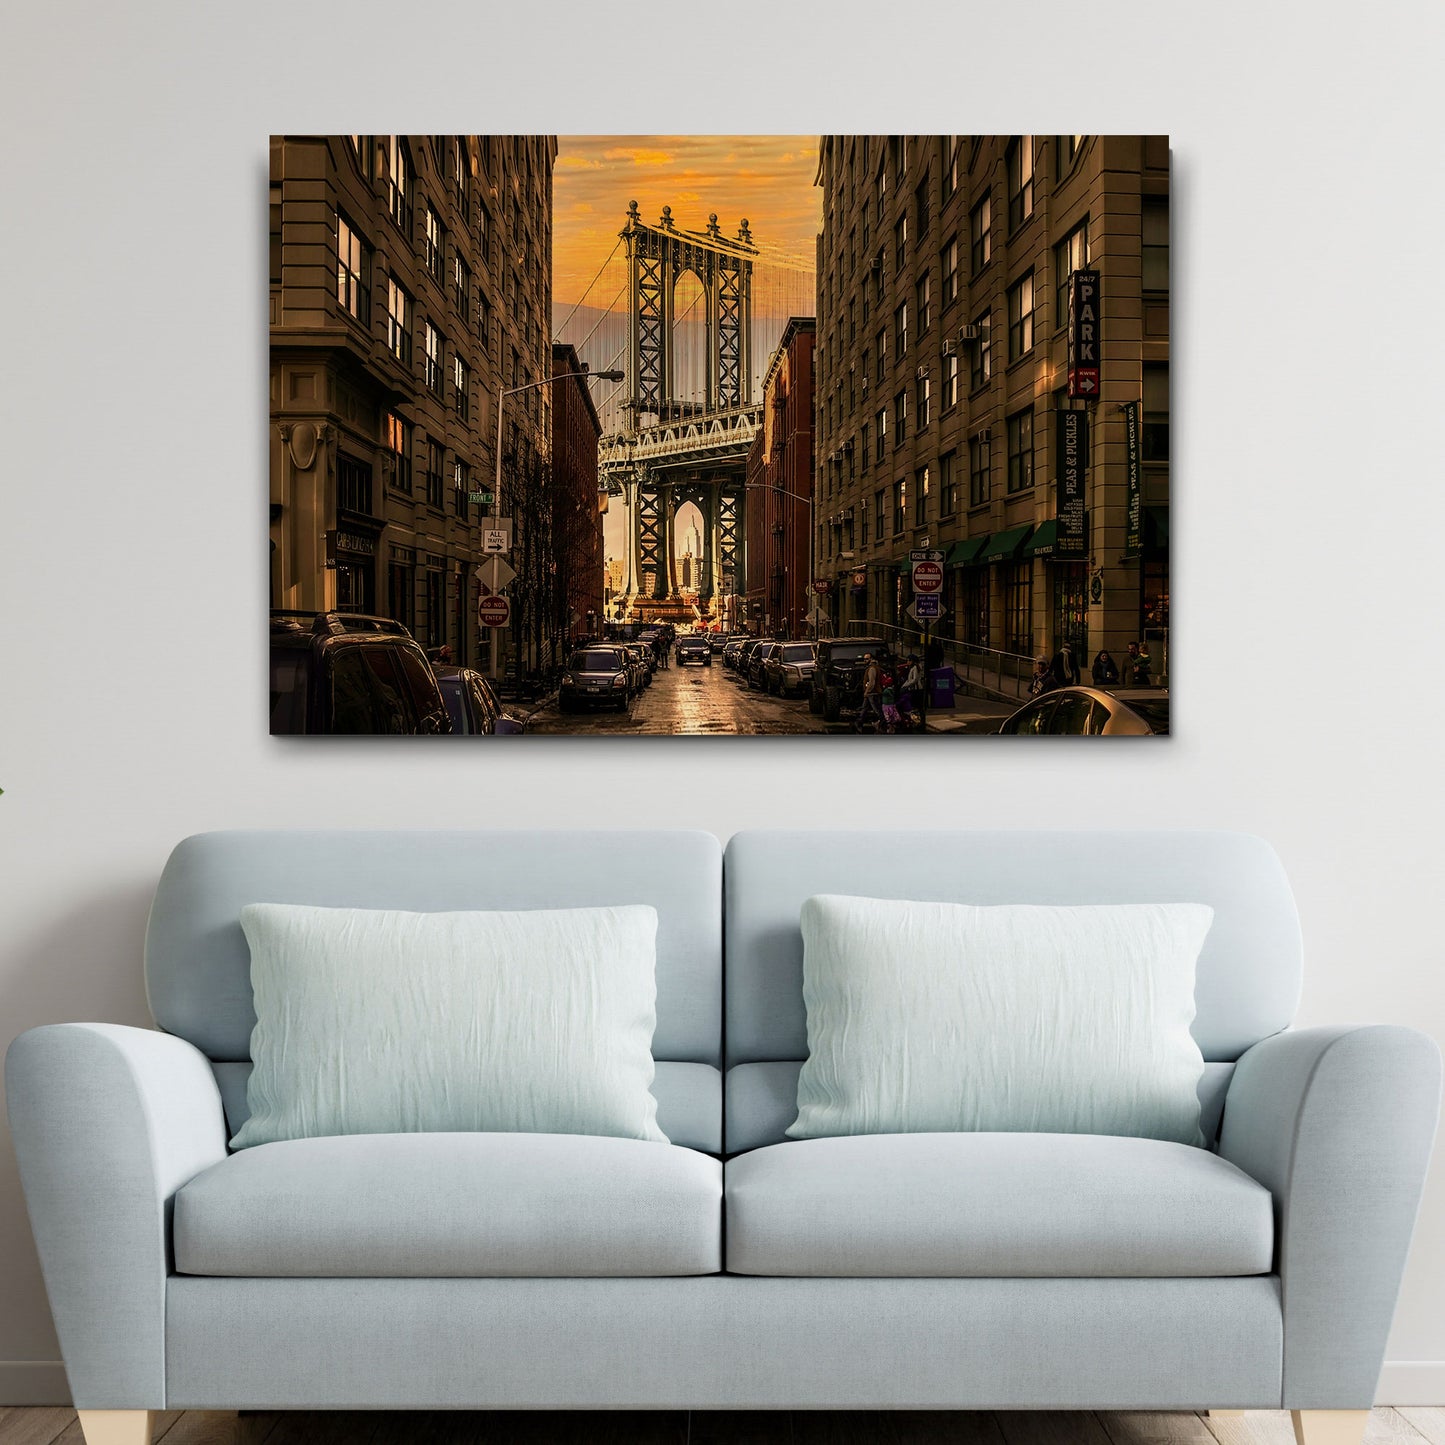 Glimpse Of Brooklyn Bridge Canvas Wall Art Style 2 - Image by Tailored Canvases